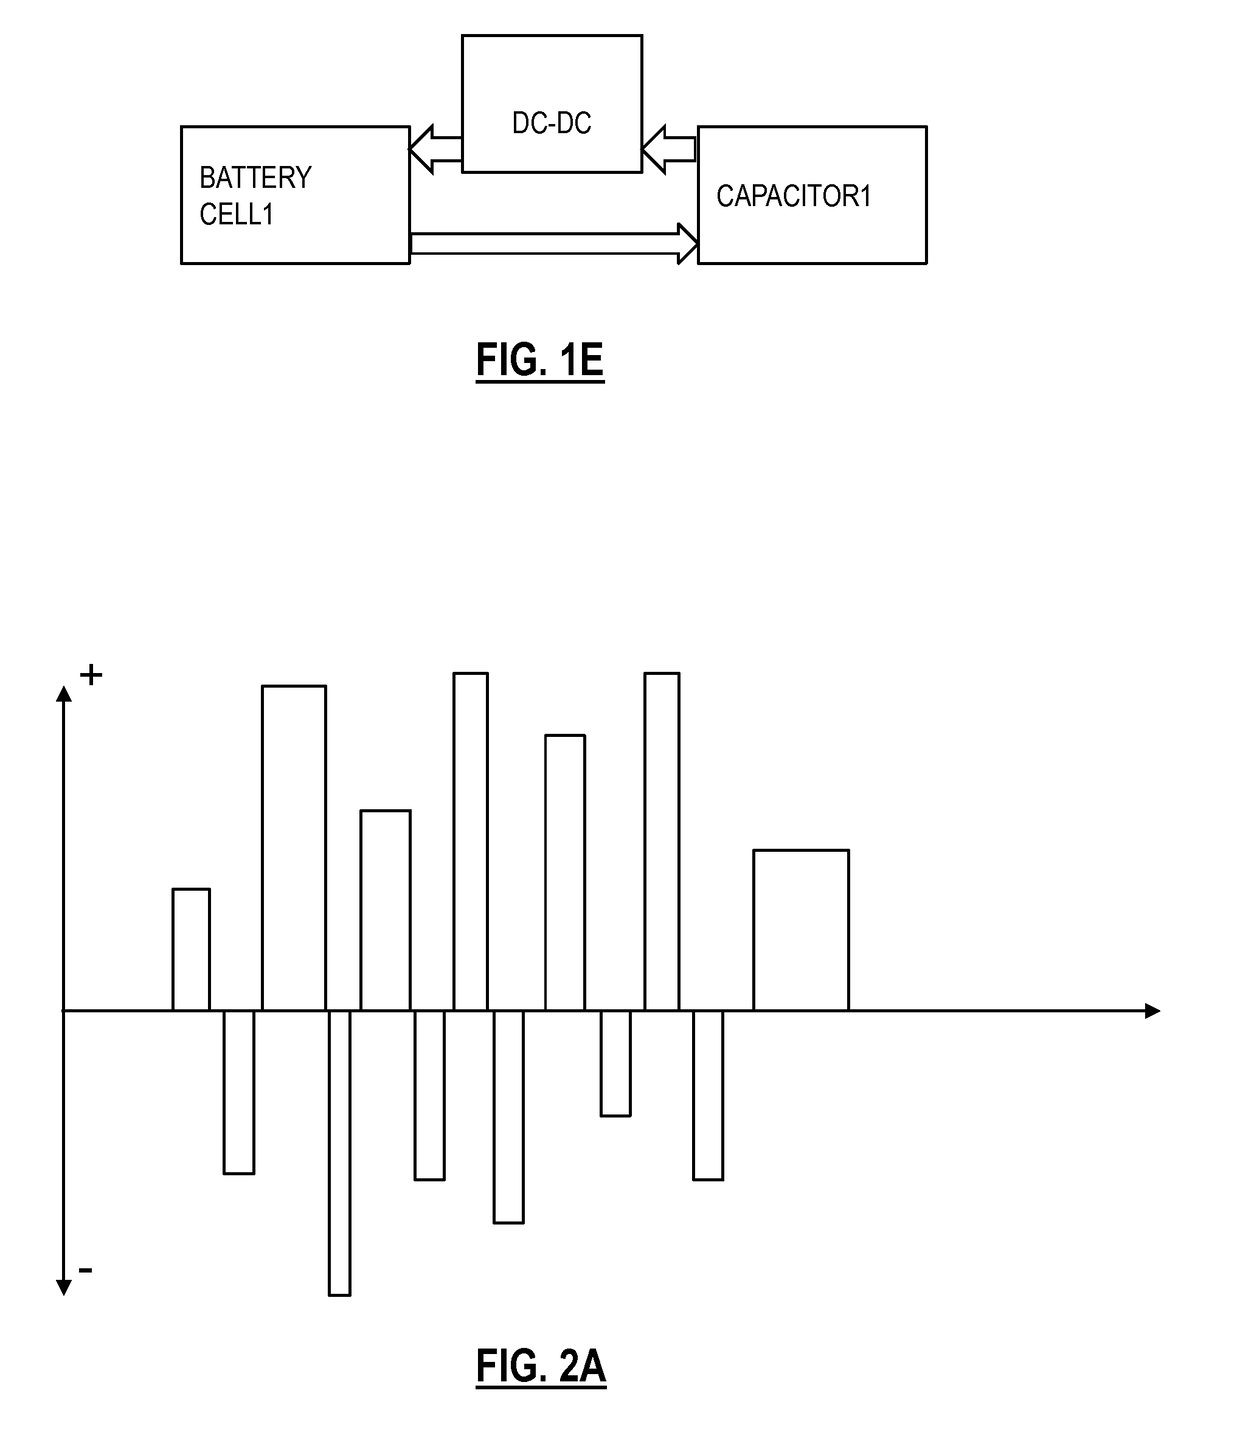 Systems and methods for enhancing the performance and utilization of battery systems